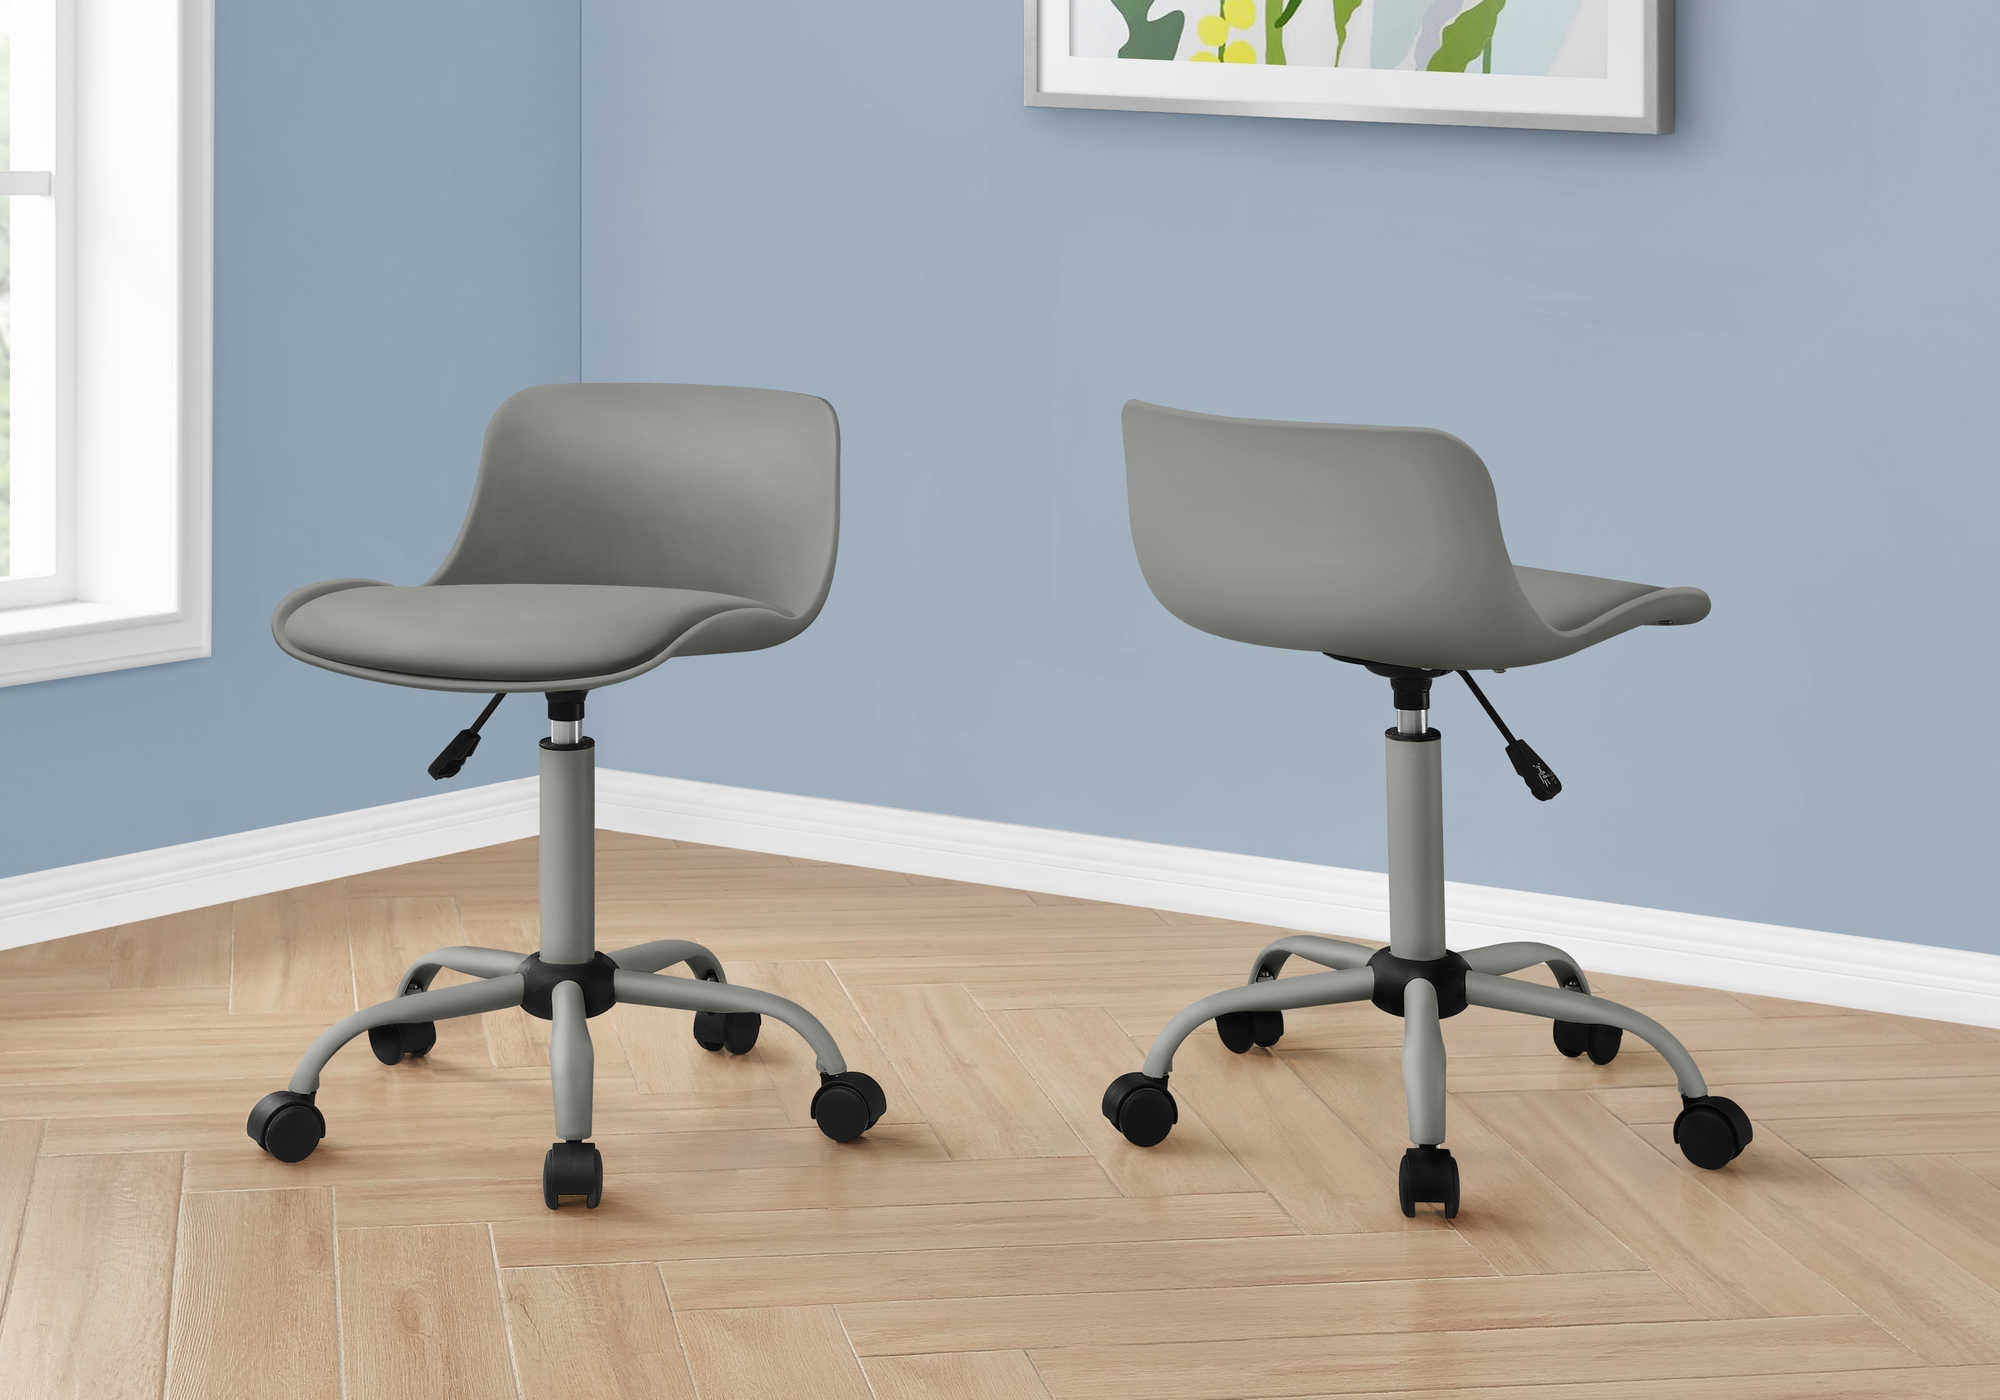 OFFICE CHAIR - GREY JUVENILE  MULTI-POSITION